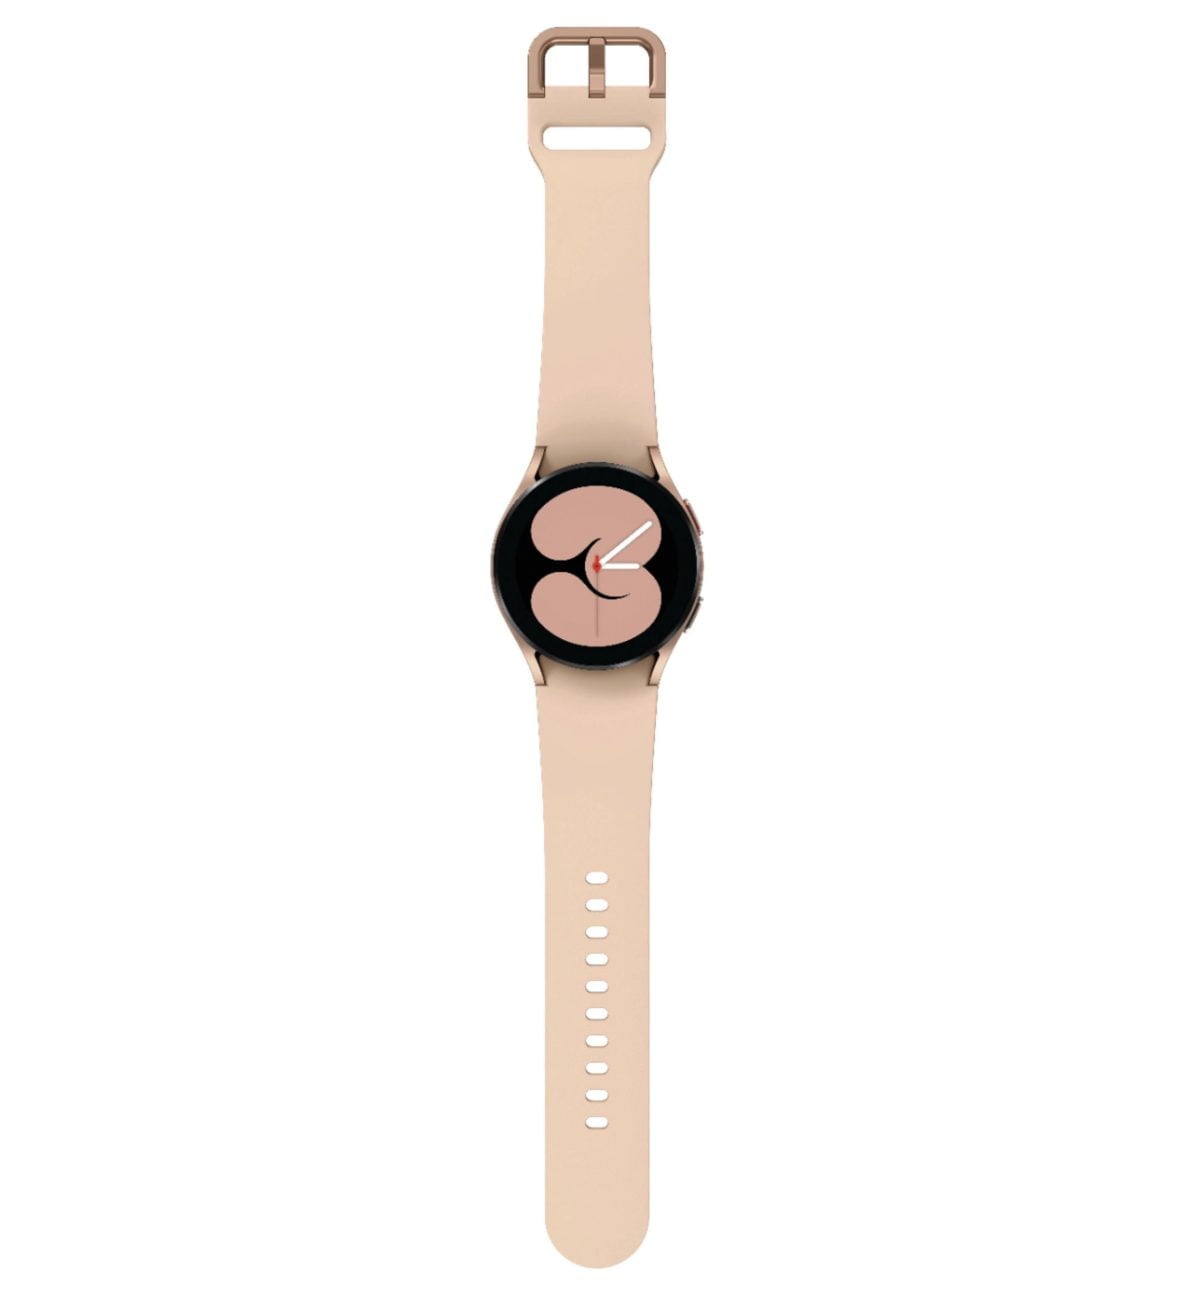 6464604Cv15D Scaled Samsung &Lt;H1&Gt;Samsung Galaxy Watch4 Aluminum Smartwatch 40Mm Bt, Gps - Gold &Lt;Span Class=&Quot;Product-Data-Label Body-Copy&Quot;&Gt;&Lt;Strong&Gt;Model&Lt;/Strong&Gt;: Sm-R860Nzdaxaa&Lt;/Span&Gt;&Lt;/H1&Gt; Https://Www.youtube.com/Watch?V=Plte1N8Pl90 &Lt;Div Class=&Quot;Embedded-Component-Container Lv Product-Description&Quot;&Gt; &Lt;Div Id=&Quot;Shop-Product-Description-6031181&Quot; Class=&Quot;None&Quot; Data-Version=&Quot;1.3.38&Quot;&Gt; &Lt;Div Class=&Quot;Shop-Product-Description&Quot;&Gt;&Lt;Section Class=&Quot;Align-Heading-Left&Quot; Data-Reactroot=&Quot;&Quot;&Gt; &Lt;Div Class=&Quot;Long-Description-Container Body-Copy &Quot;&Gt; &Lt;Div Class=&Quot;Html-Fragment&Quot;&Gt; &Lt;Div&Gt; &Lt;Div&Gt;Crush Workouts And All Your Health Goals With Samsung Galaxy Watch4. Be Your Best With The Watch That Knows You Best.&Lt;/Div&Gt; &Lt;Div&Gt;We All Want To Know More About Ourselves, So We Can Be The Best Version Of Ourselves. That'S Why We Engineered The All-New Galaxy Watch4 Classic To Be The Stylish Companion To Your Journey Towards A Healthier You Some Looks Are Timeless, Like The Galaxy Watch4 Classic’s Rotating Bezel And Vivid Screen. The Refined Design Adds Sophistication To Your Wrist For An Elevated Style. Its High-End Stainless Steel Materials Shows Off Its Powerful And Intuitive Functionality&Lt;/Div&Gt; &Lt;/Div&Gt; &Lt;/Div&Gt; &Lt;/Div&Gt; &Lt;/Section&Gt;&Lt;/Div&Gt; &Lt;/Div&Gt; &Lt;/Div&Gt; Samsung Galaxy Watch4 Samsung Galaxy Watch4 Aluminum Smartwatch 40Mm- Gold